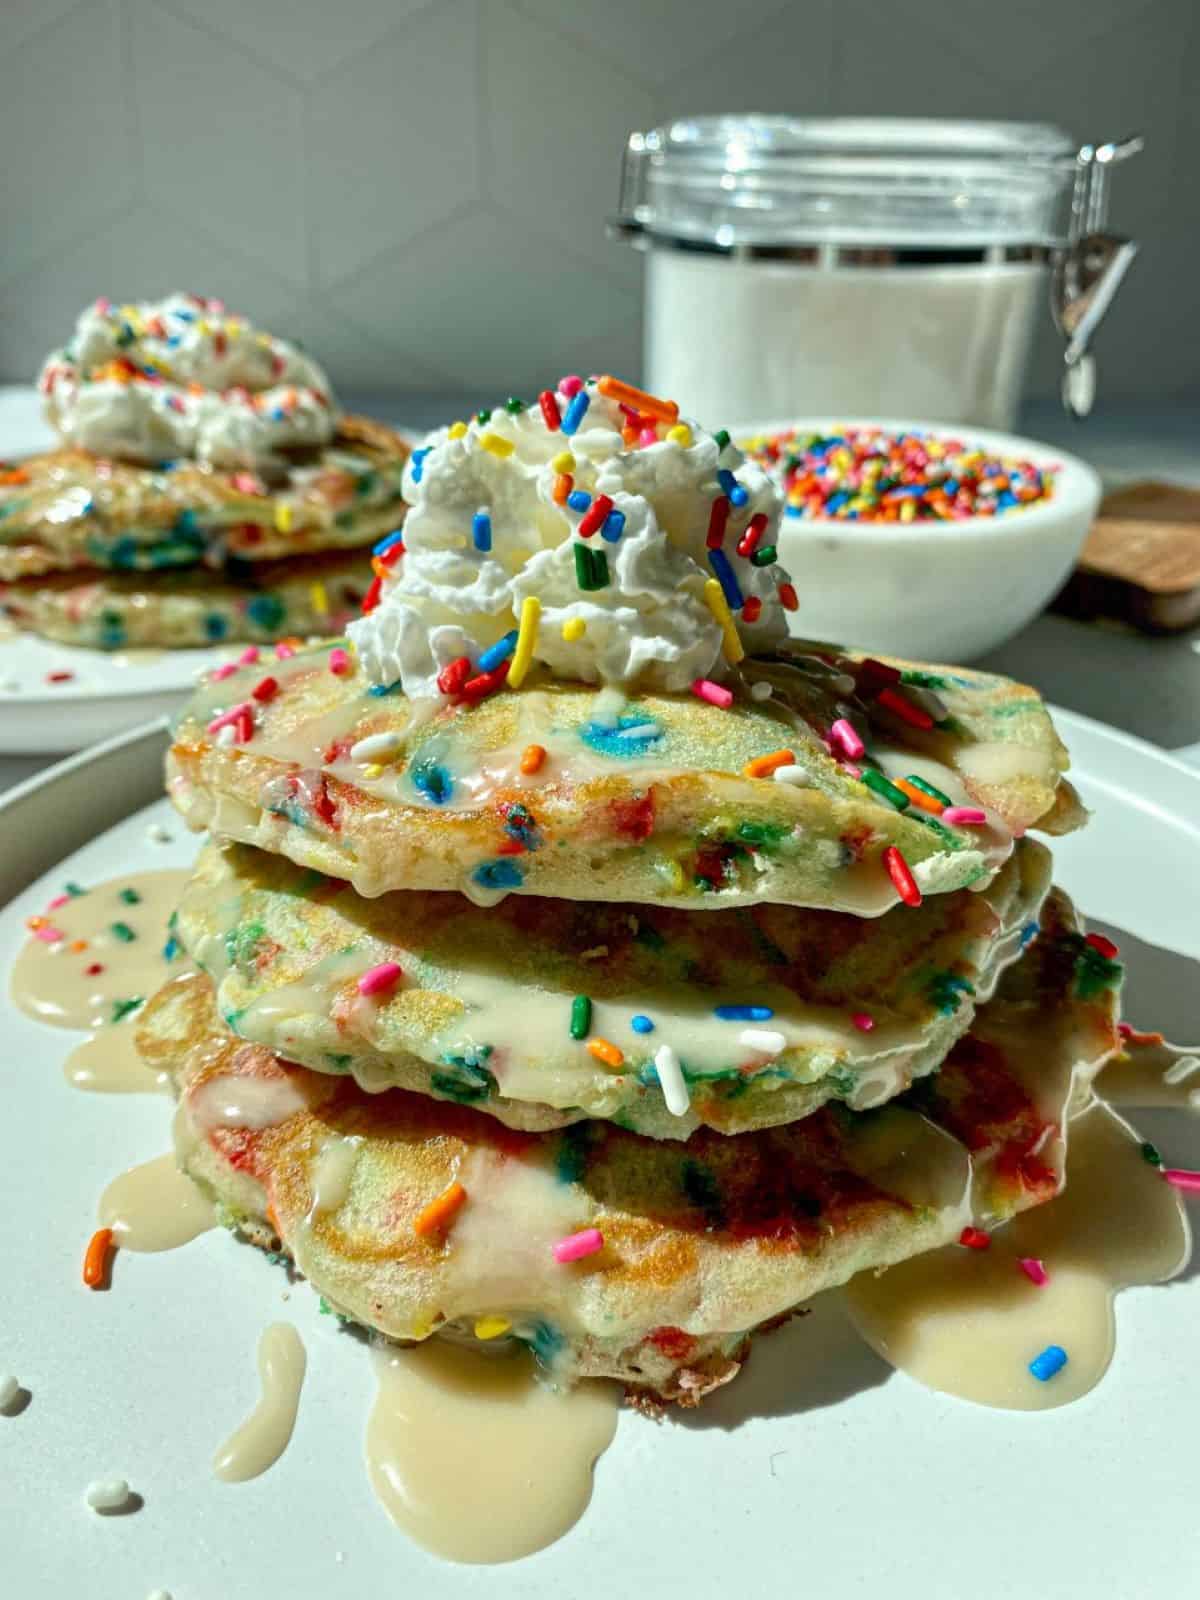 Two stacks of  homemade funfetti pancakes with sprinkles on white plates with a bowl of rainbow sprinkles on the side.